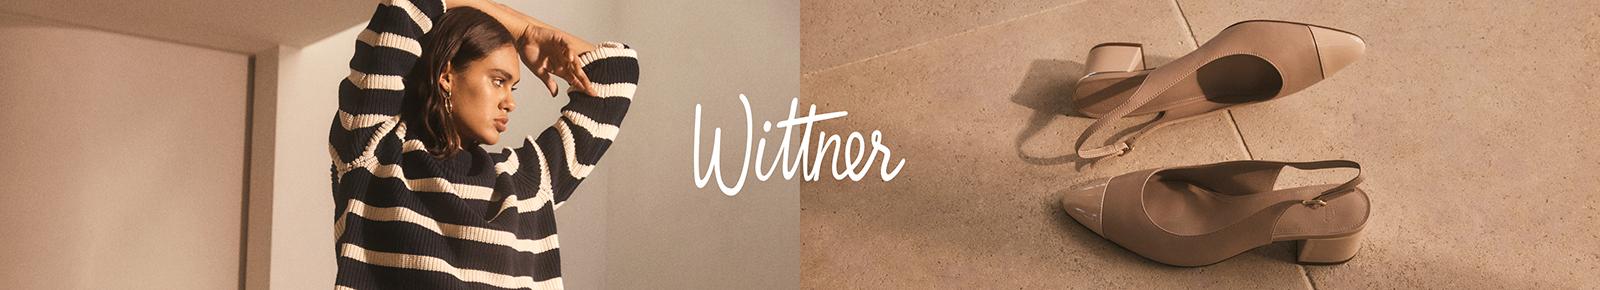 Wittner Shoes - A winter icon redefined for the warmer season. Discover  Cecile online and in-store. - wittner.com.au/shoes | Facebook